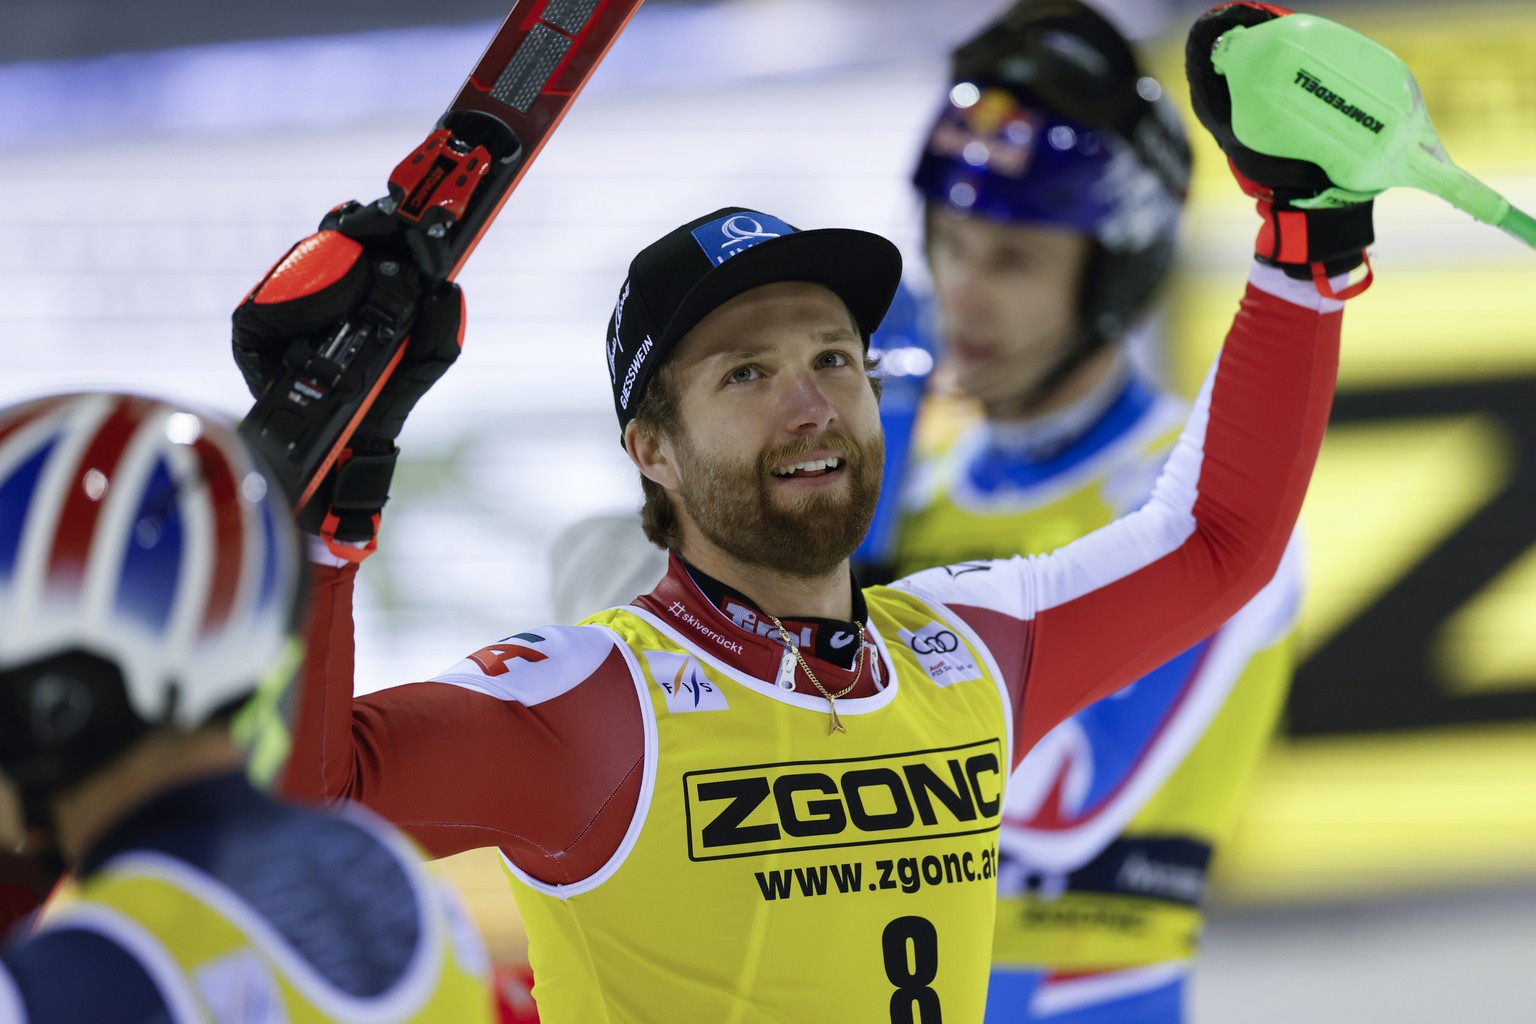 Austrian Marco Schwarz celebrates his victory in the men's World Cup alpine skiing and slalom races, in Madonna di Campiglio, Italy, Friday, December 12, 2019. November 22, 2023. (AP Photo/Alessandro Trovati)